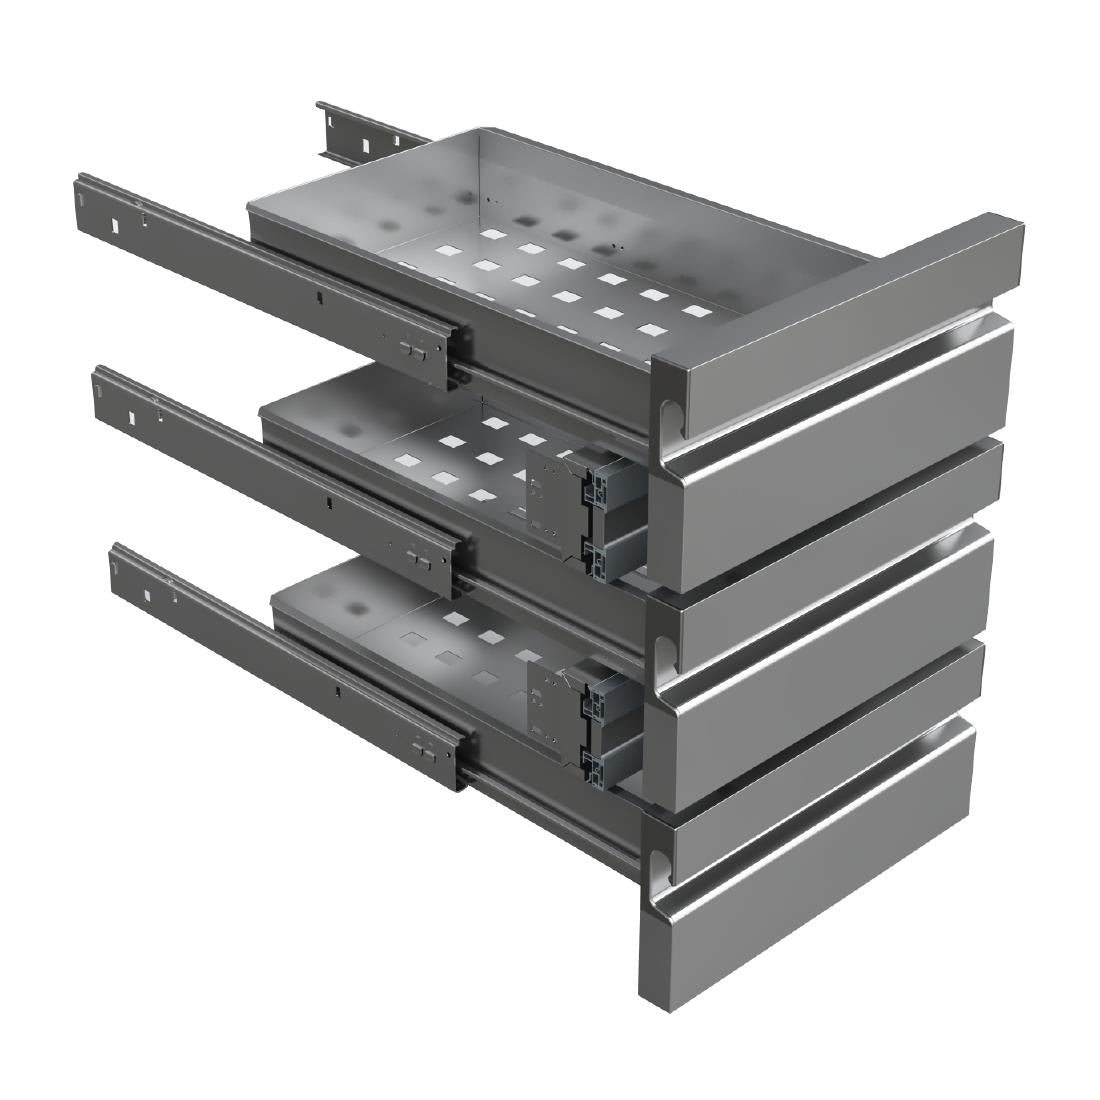 FU021 Fagor Advance Kit Drawers for Counter Units 1/3 & 1/3 & 1/3 GN ADV JD Catering Equipment Solutions Ltd